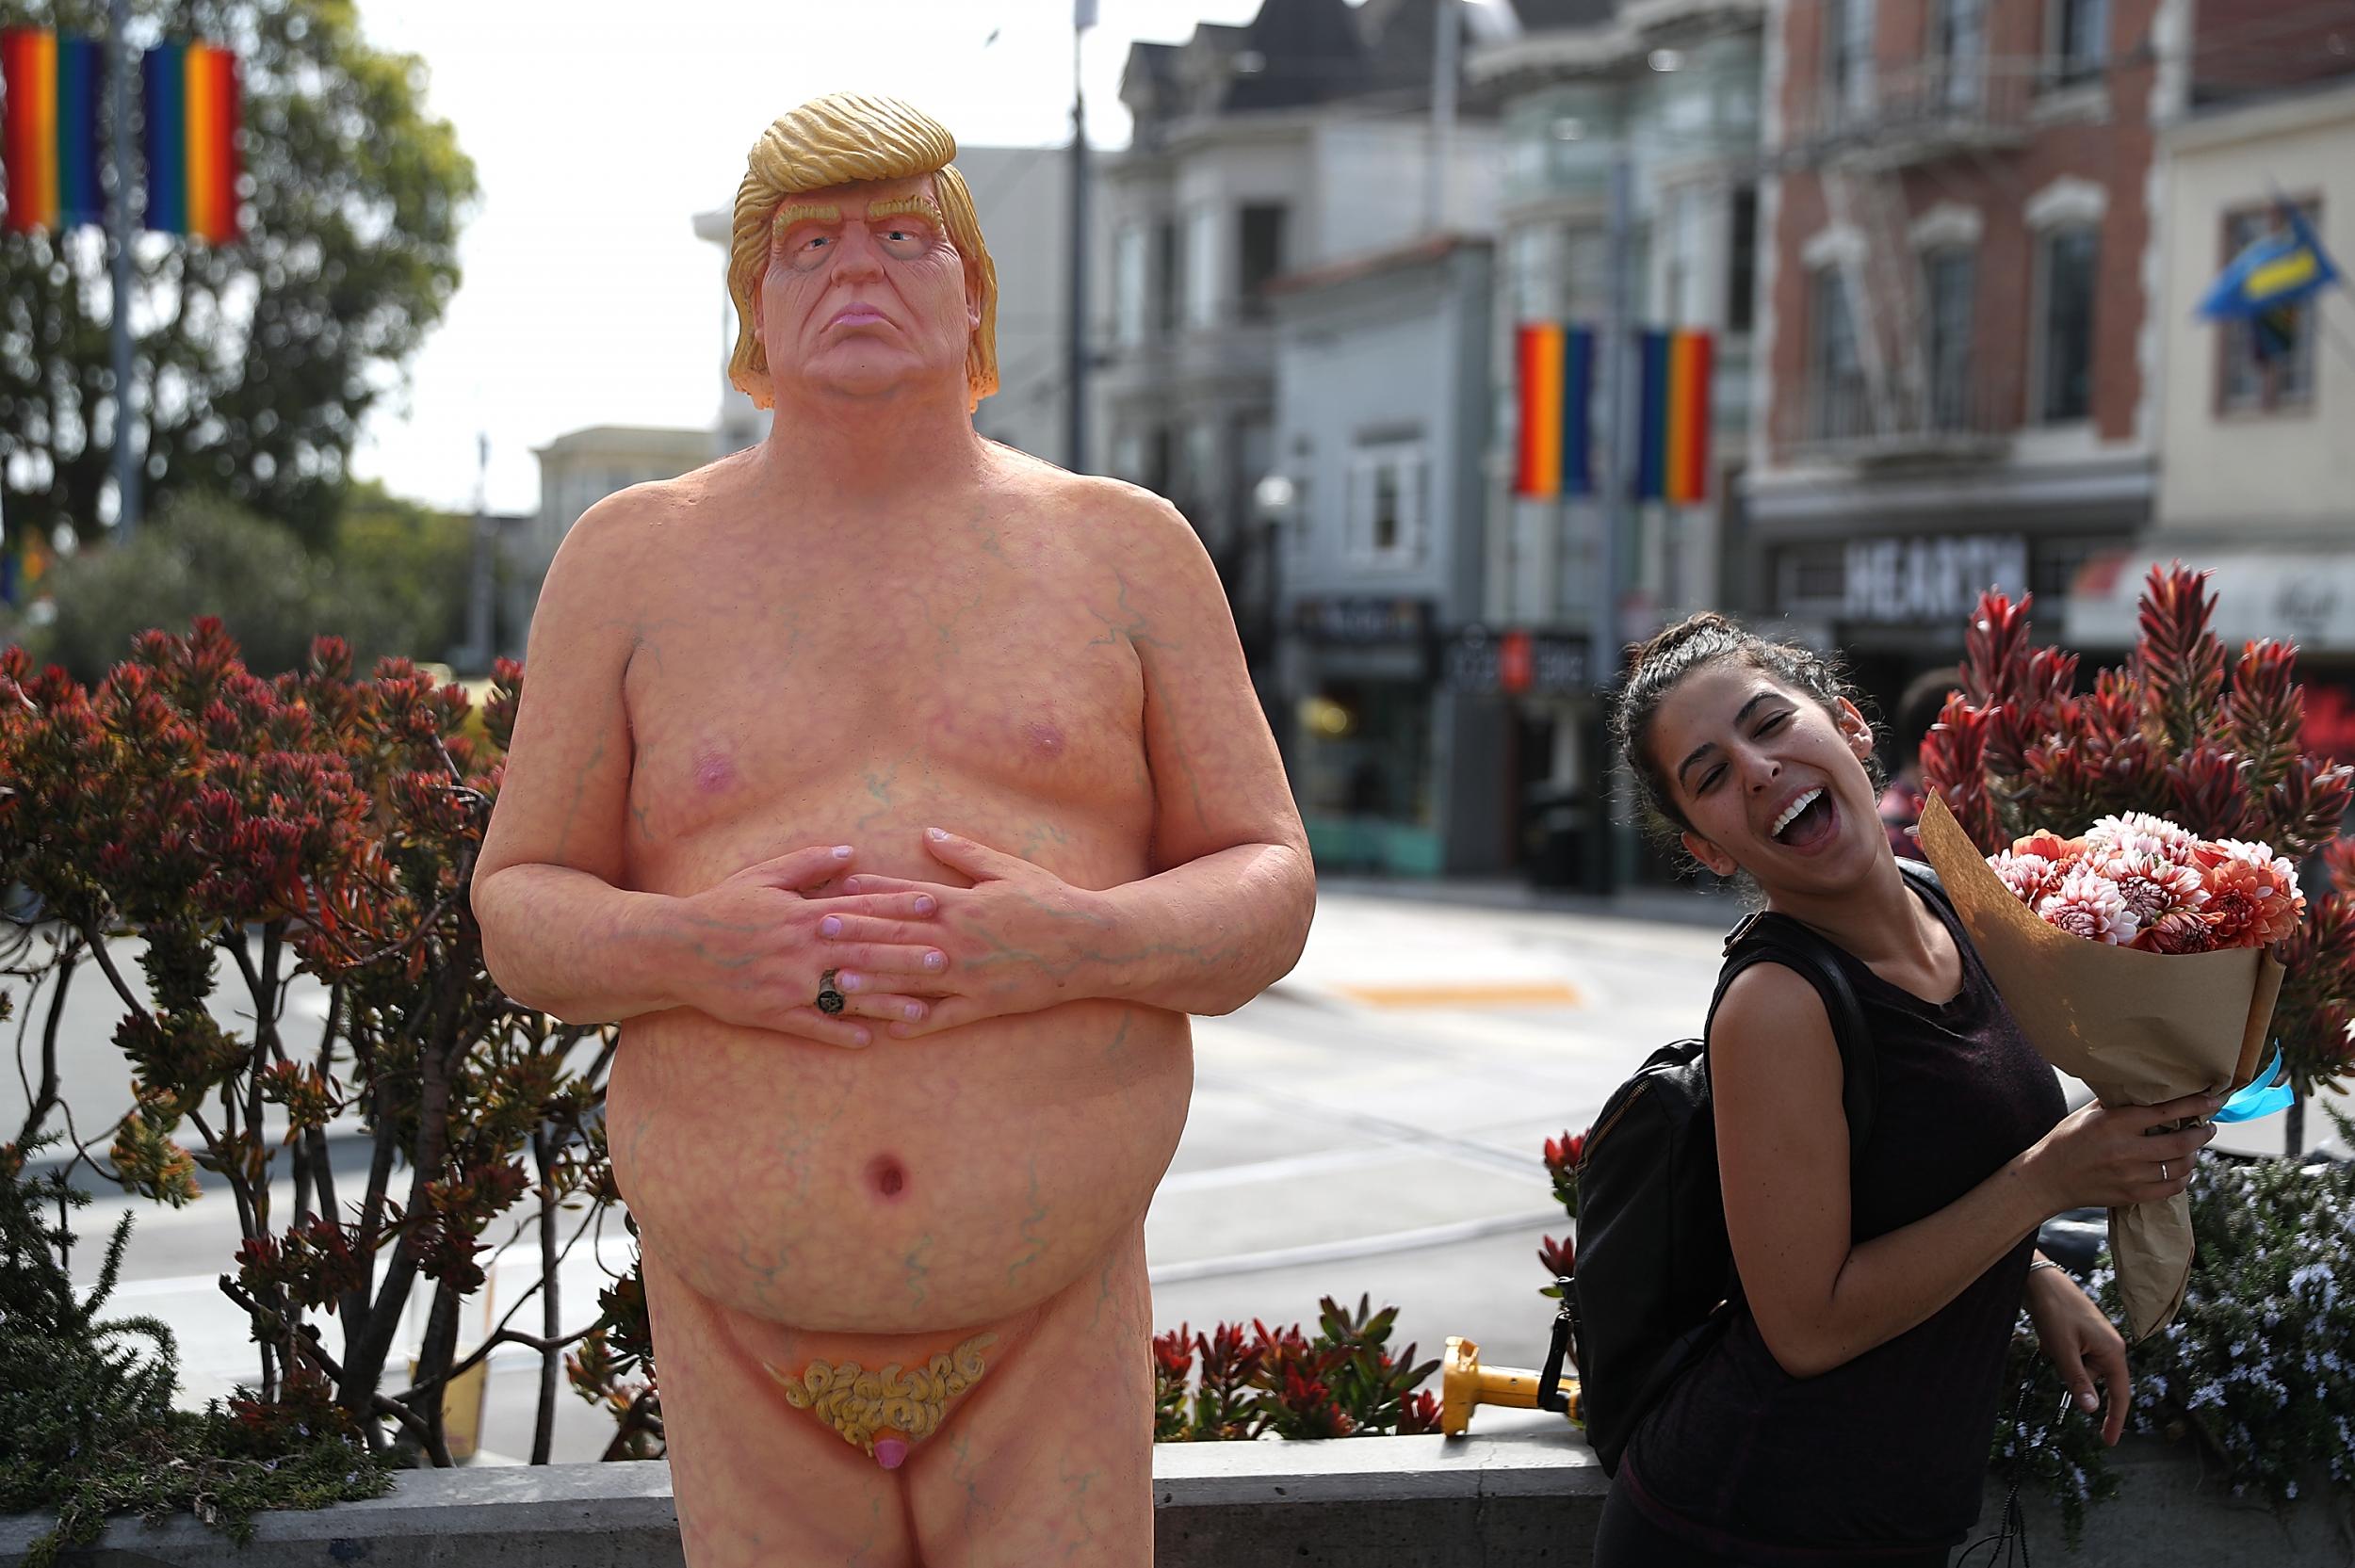 Naked Donald Trump statue expected to picture